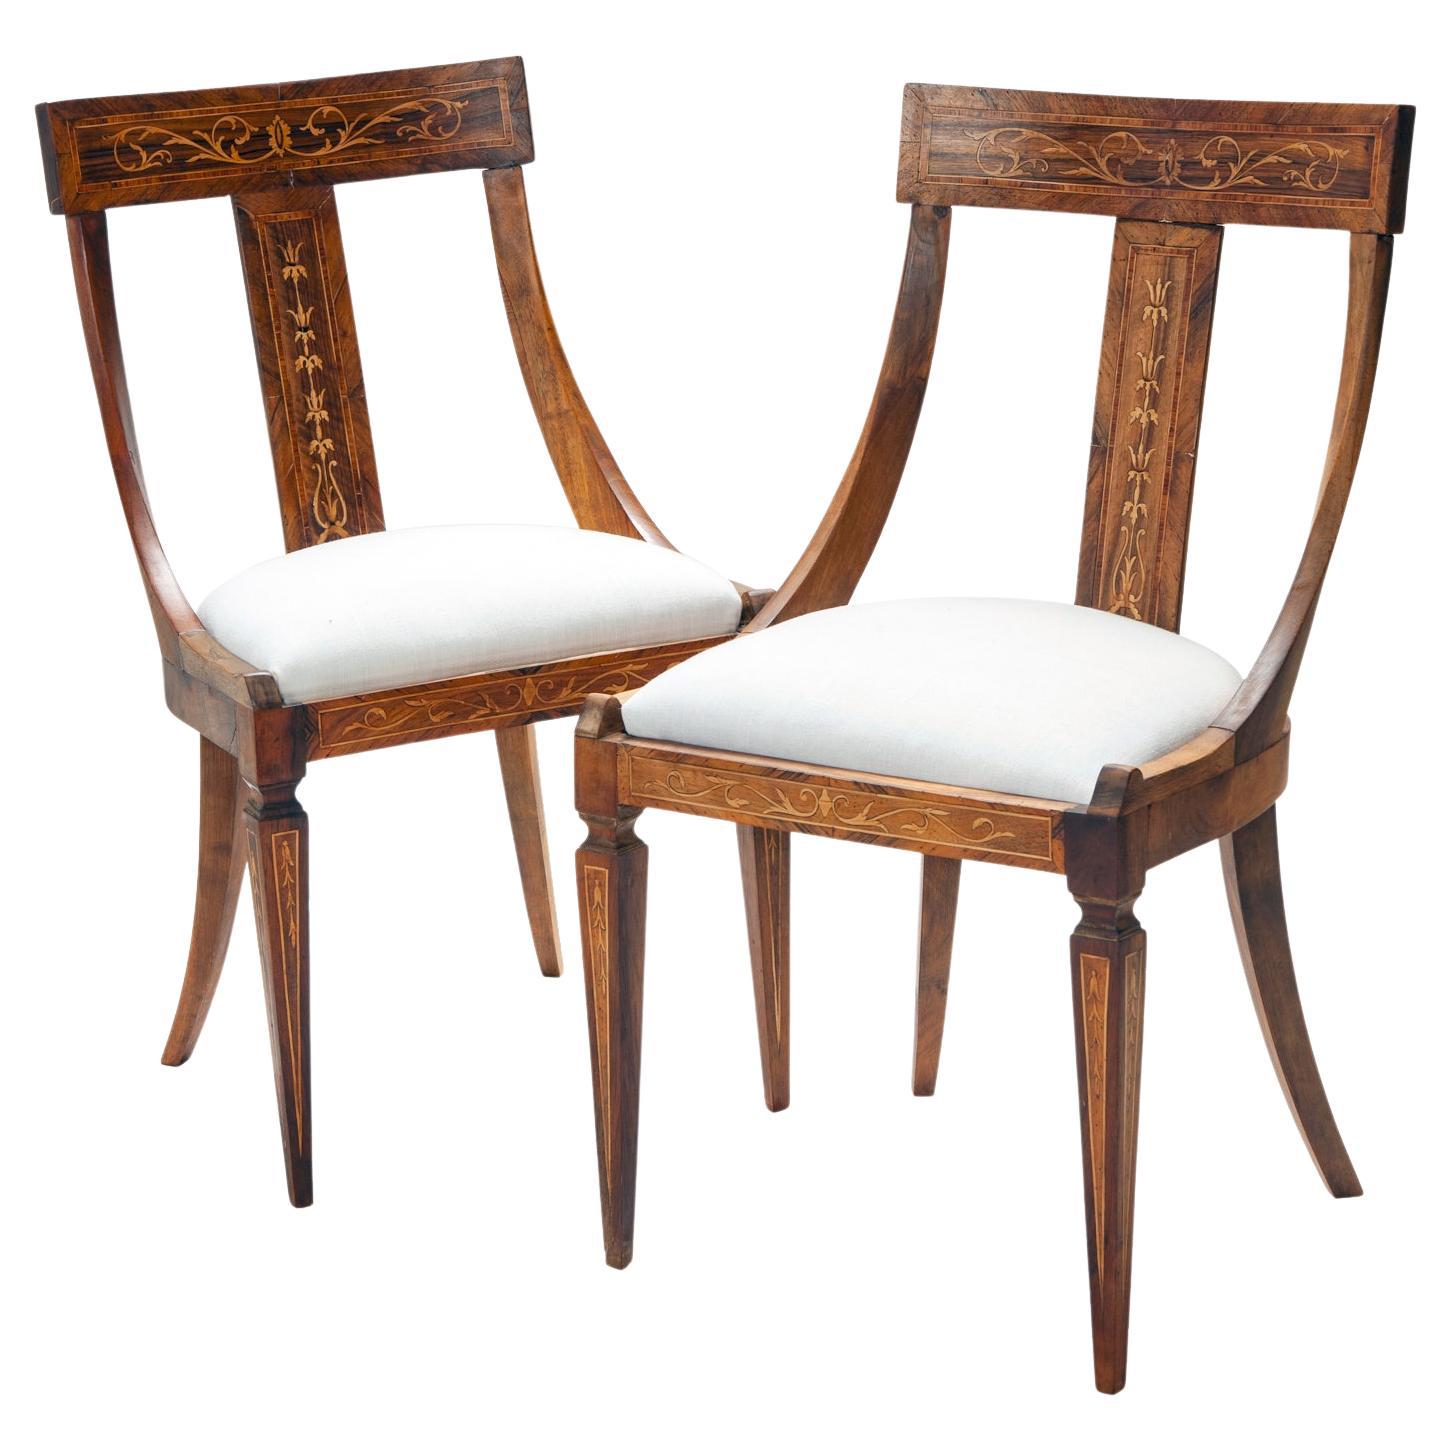 Set of four classic Biedermeier dining chairs with decorative inlay on the curved back panel & legs.
Newly upholstered drop in seats covered in in fine light weight off-white linen. 
Additional upholstery options are available upon request.
Standing